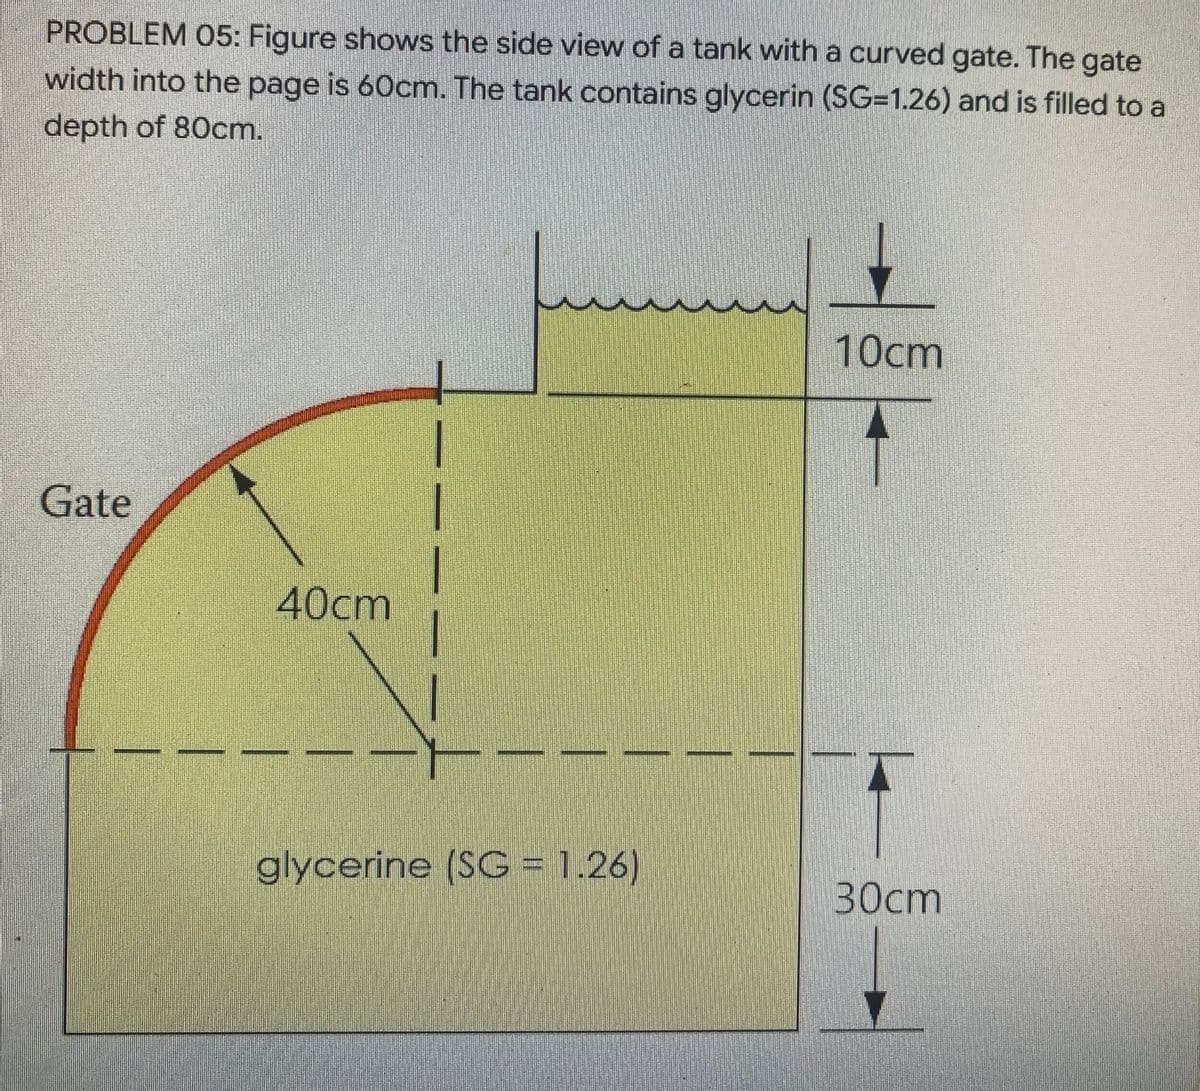 PROBLEM 05: Figure shows the side view of a tank with a curved gate. The gate
width into the page is 60cm. The tank contains glycerin (SG=1.26) and is filled to a
depth of 80cm.
10cm
Gate
40cm
glycerine (SG = 1.26)
30ст
